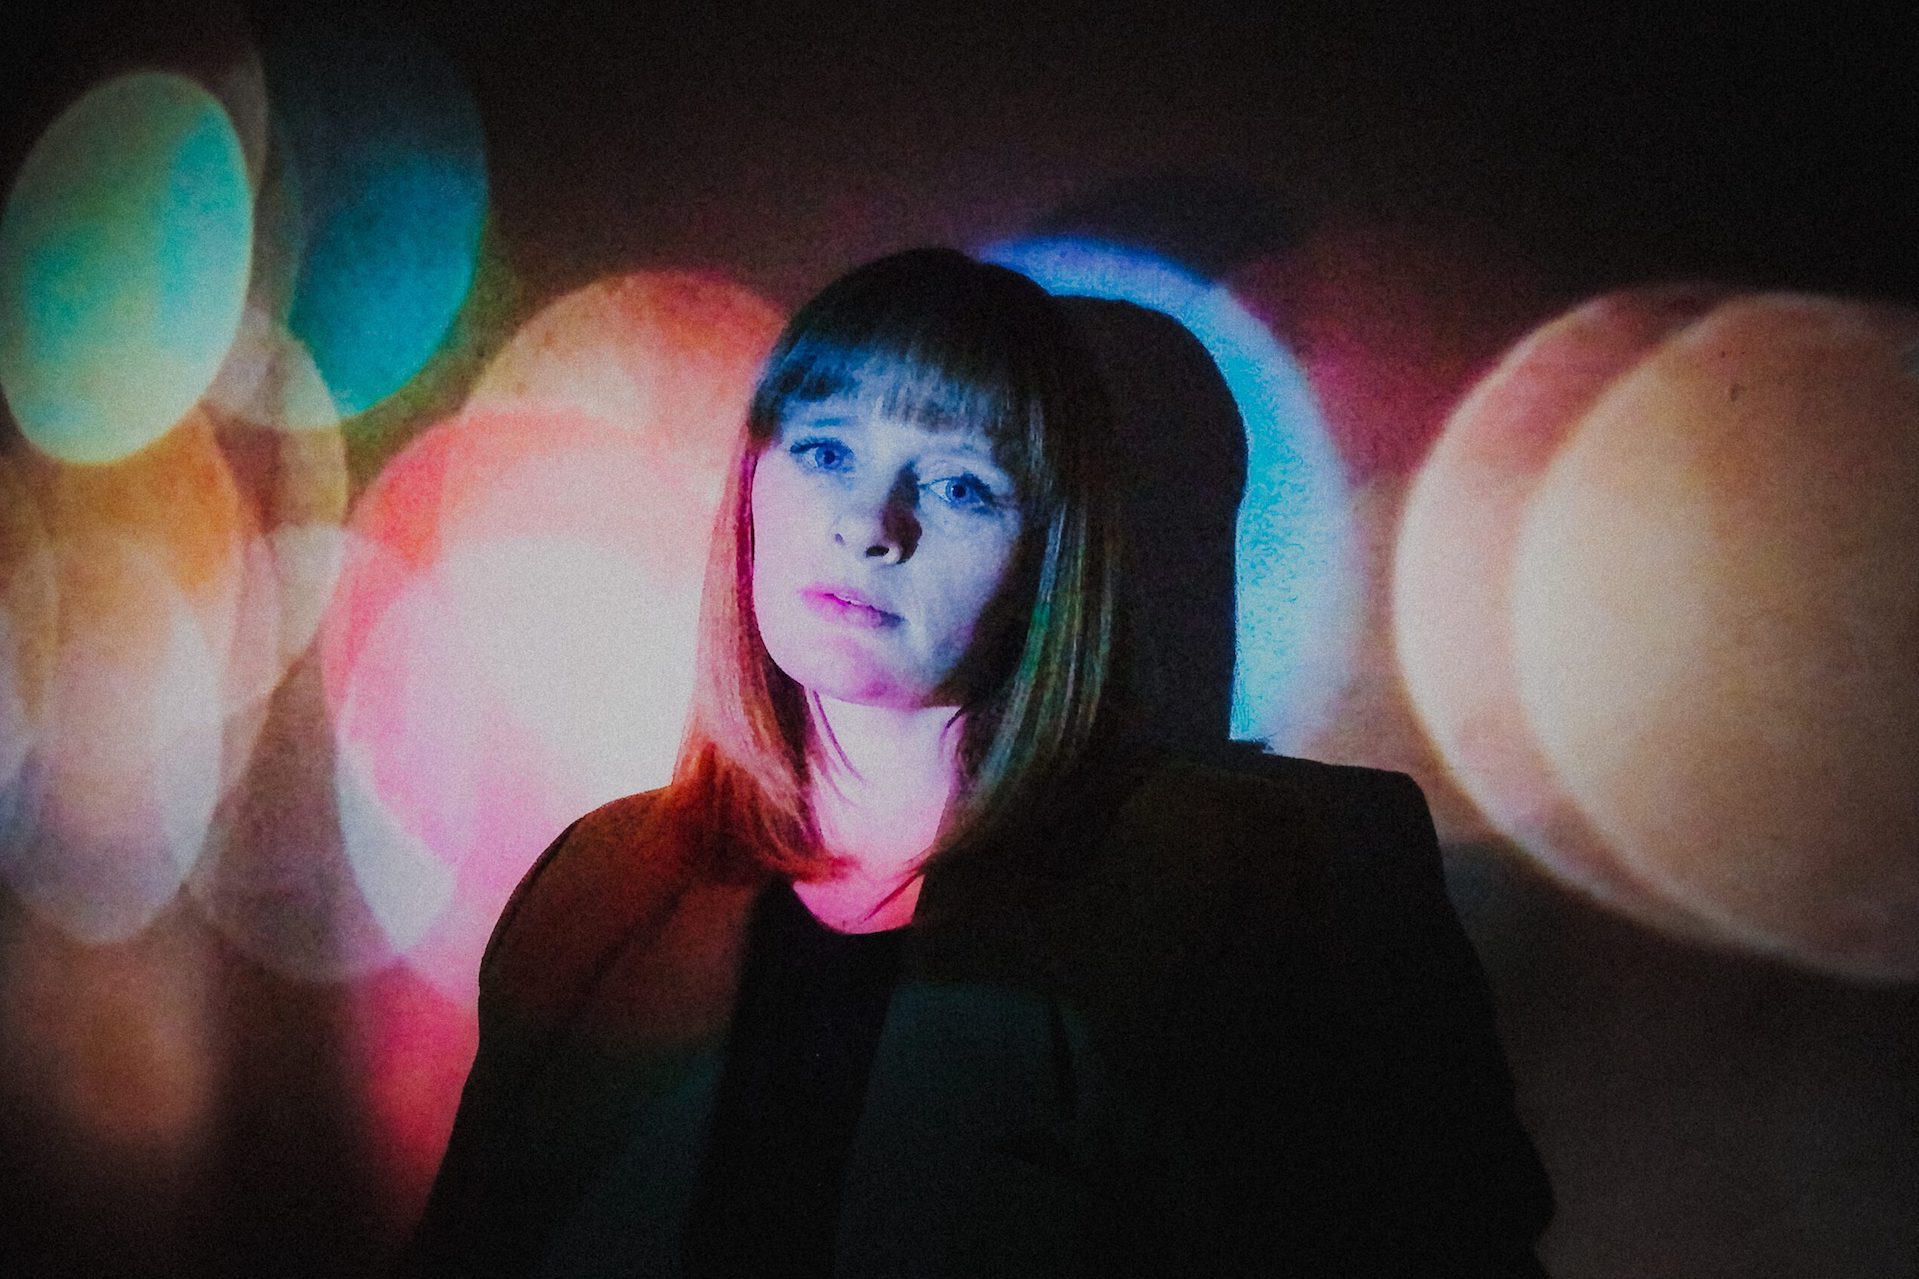 A woman is looking slightly sadly at the camera with faded colourful spot lights on and around her.